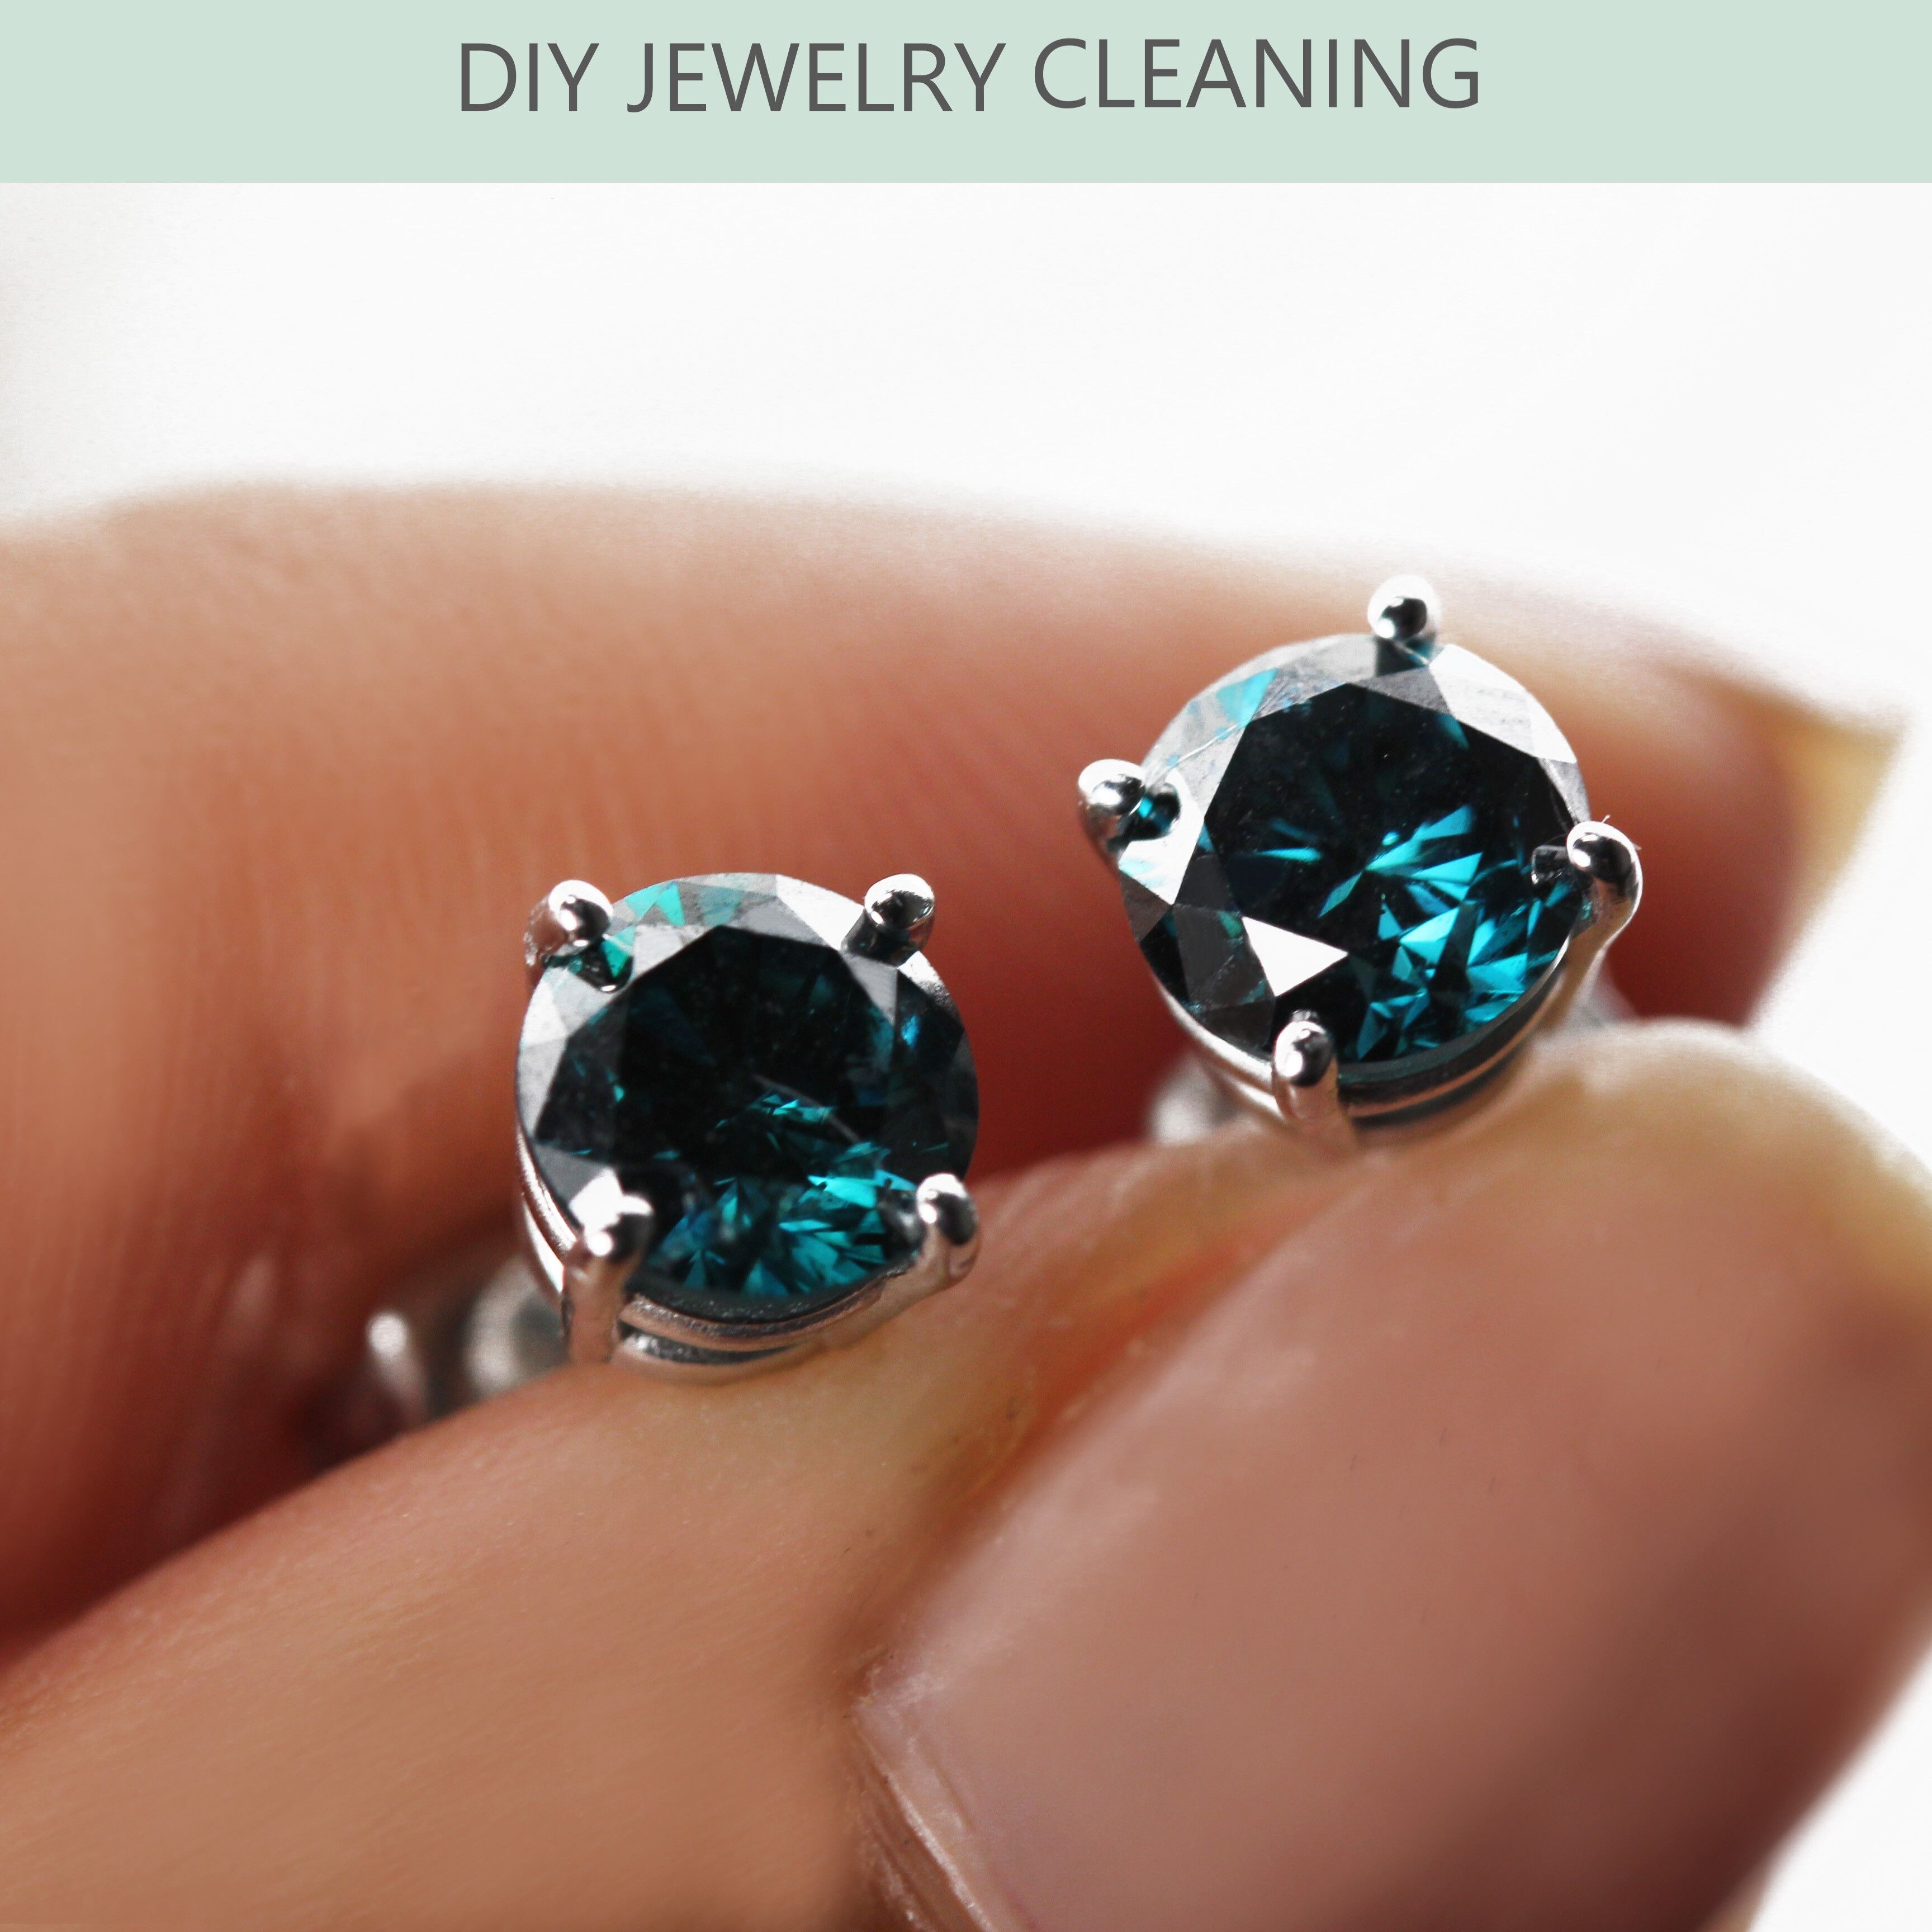 How to Clean Jewelry DIY Comprehensive Guide